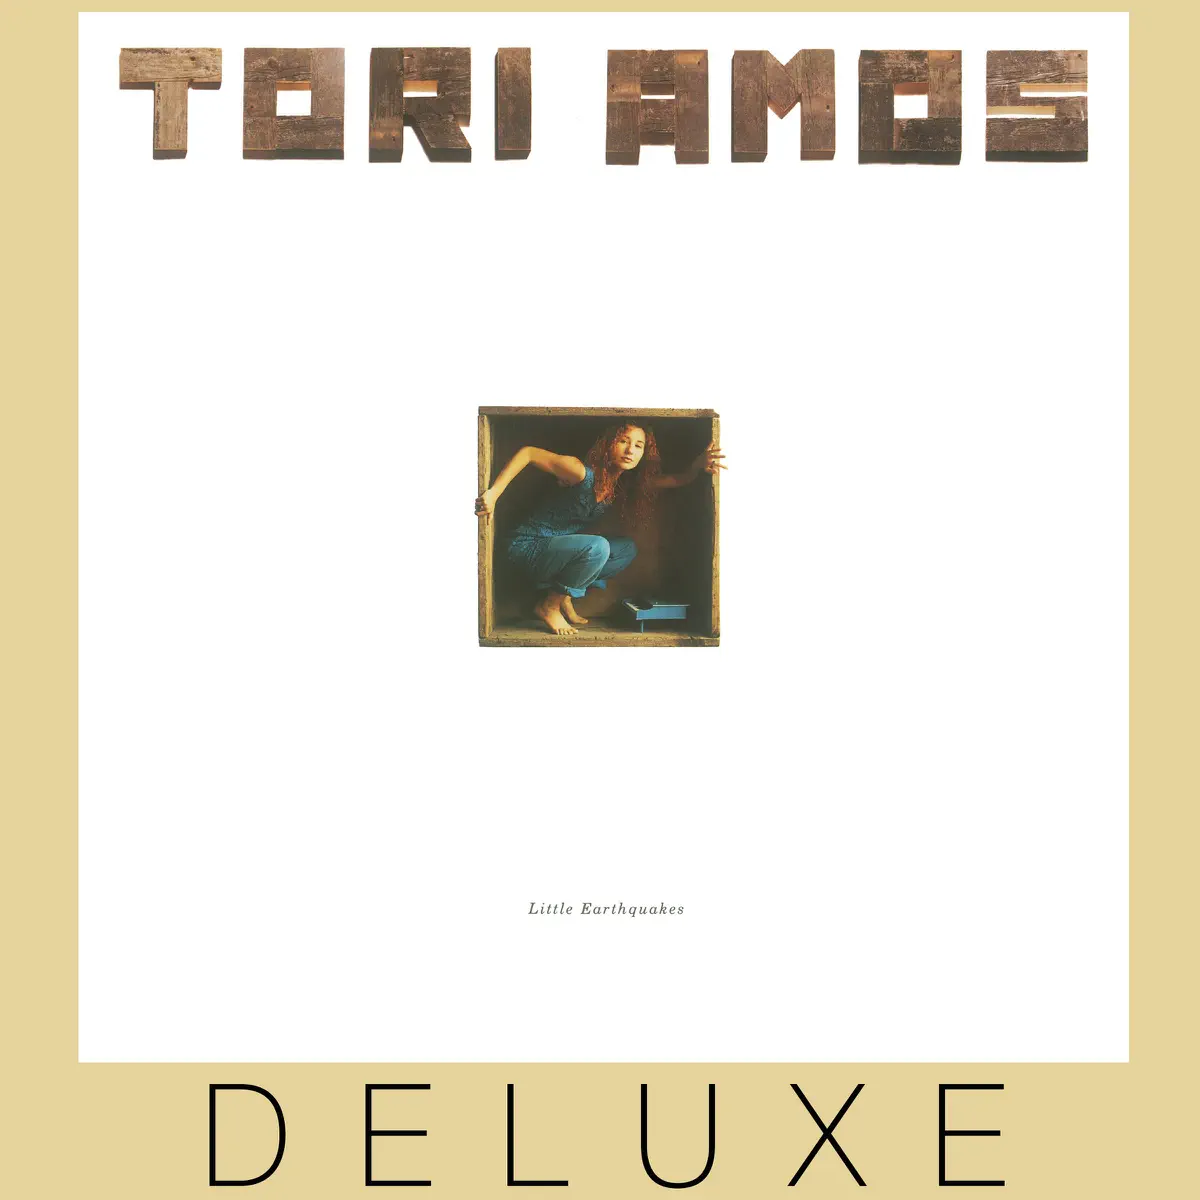 Tori Amos - Little Earthquakes (Deluxe Edition) [Remastered] (2015) [iTunes Plus AAC M4A]-新房子